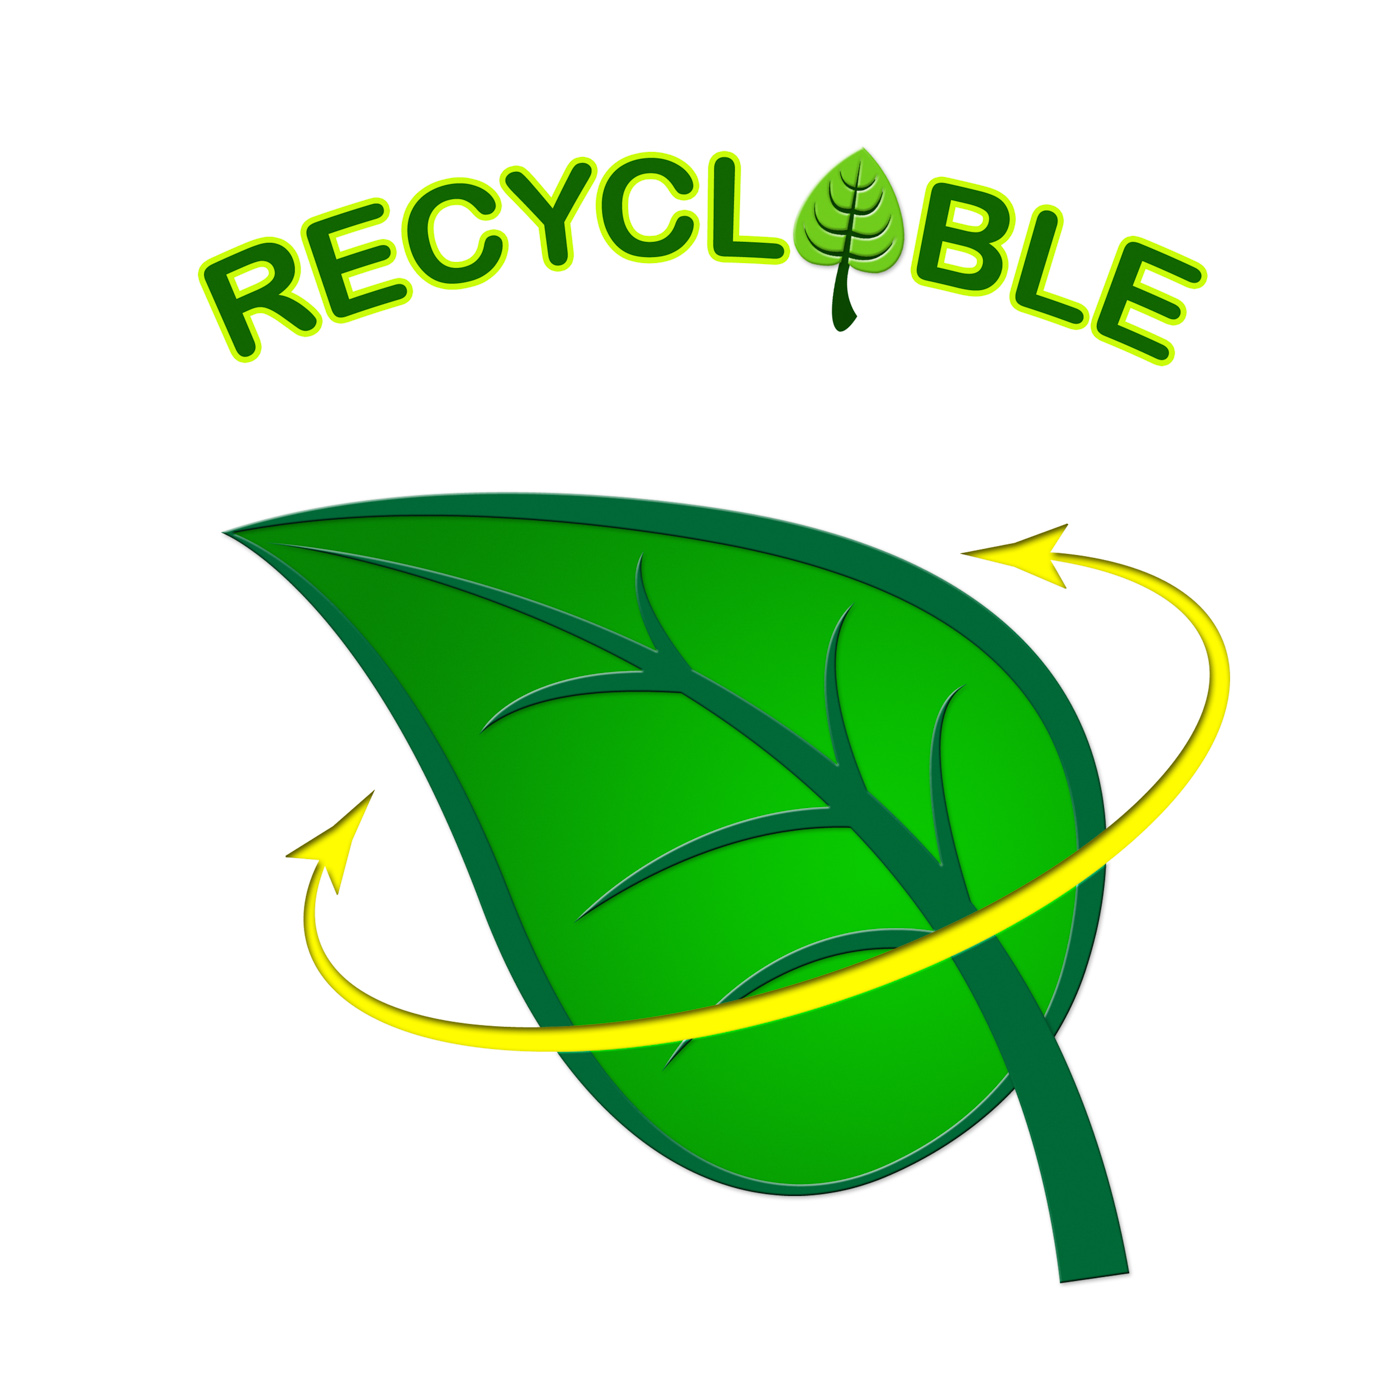 Recyclable Leaf Indicates Earth Friendly And Eco, Green, Renewable, Recycling, Recycled, HQ Photo